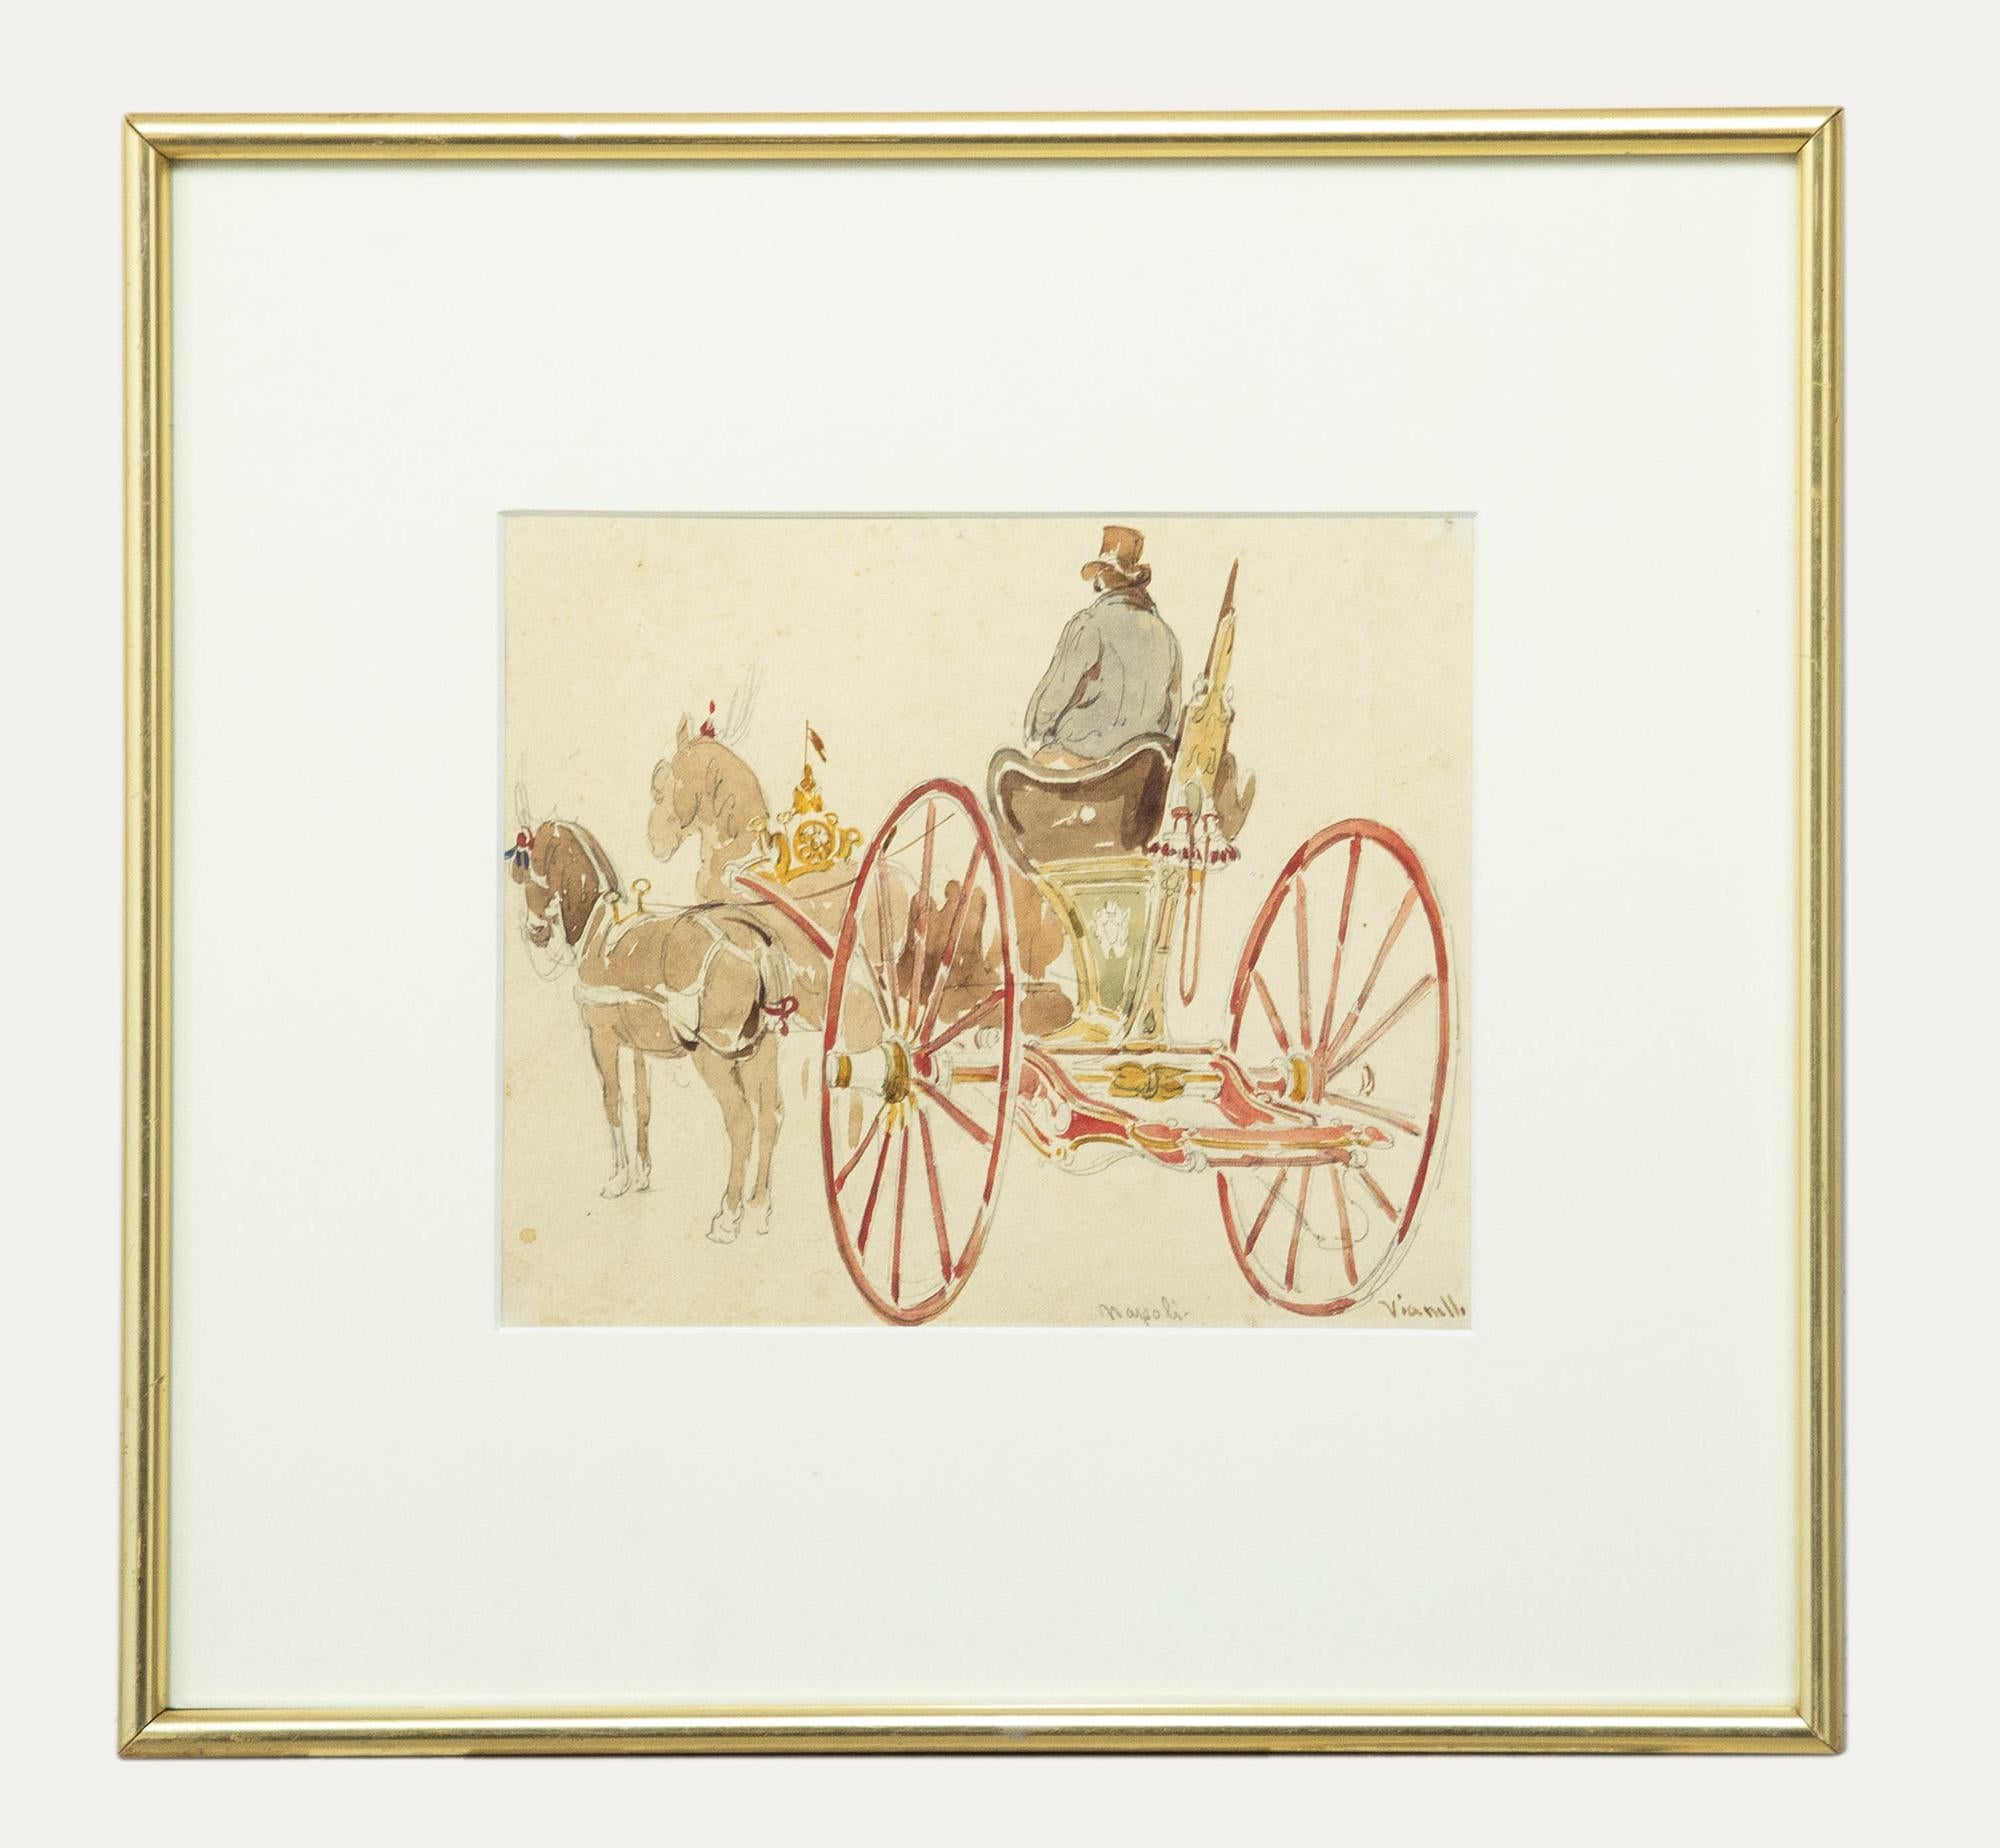 Unknown Animal Art - Achille Vianelli (1803-1894) - Watercolour, Study of a Horse Drawn Carriage